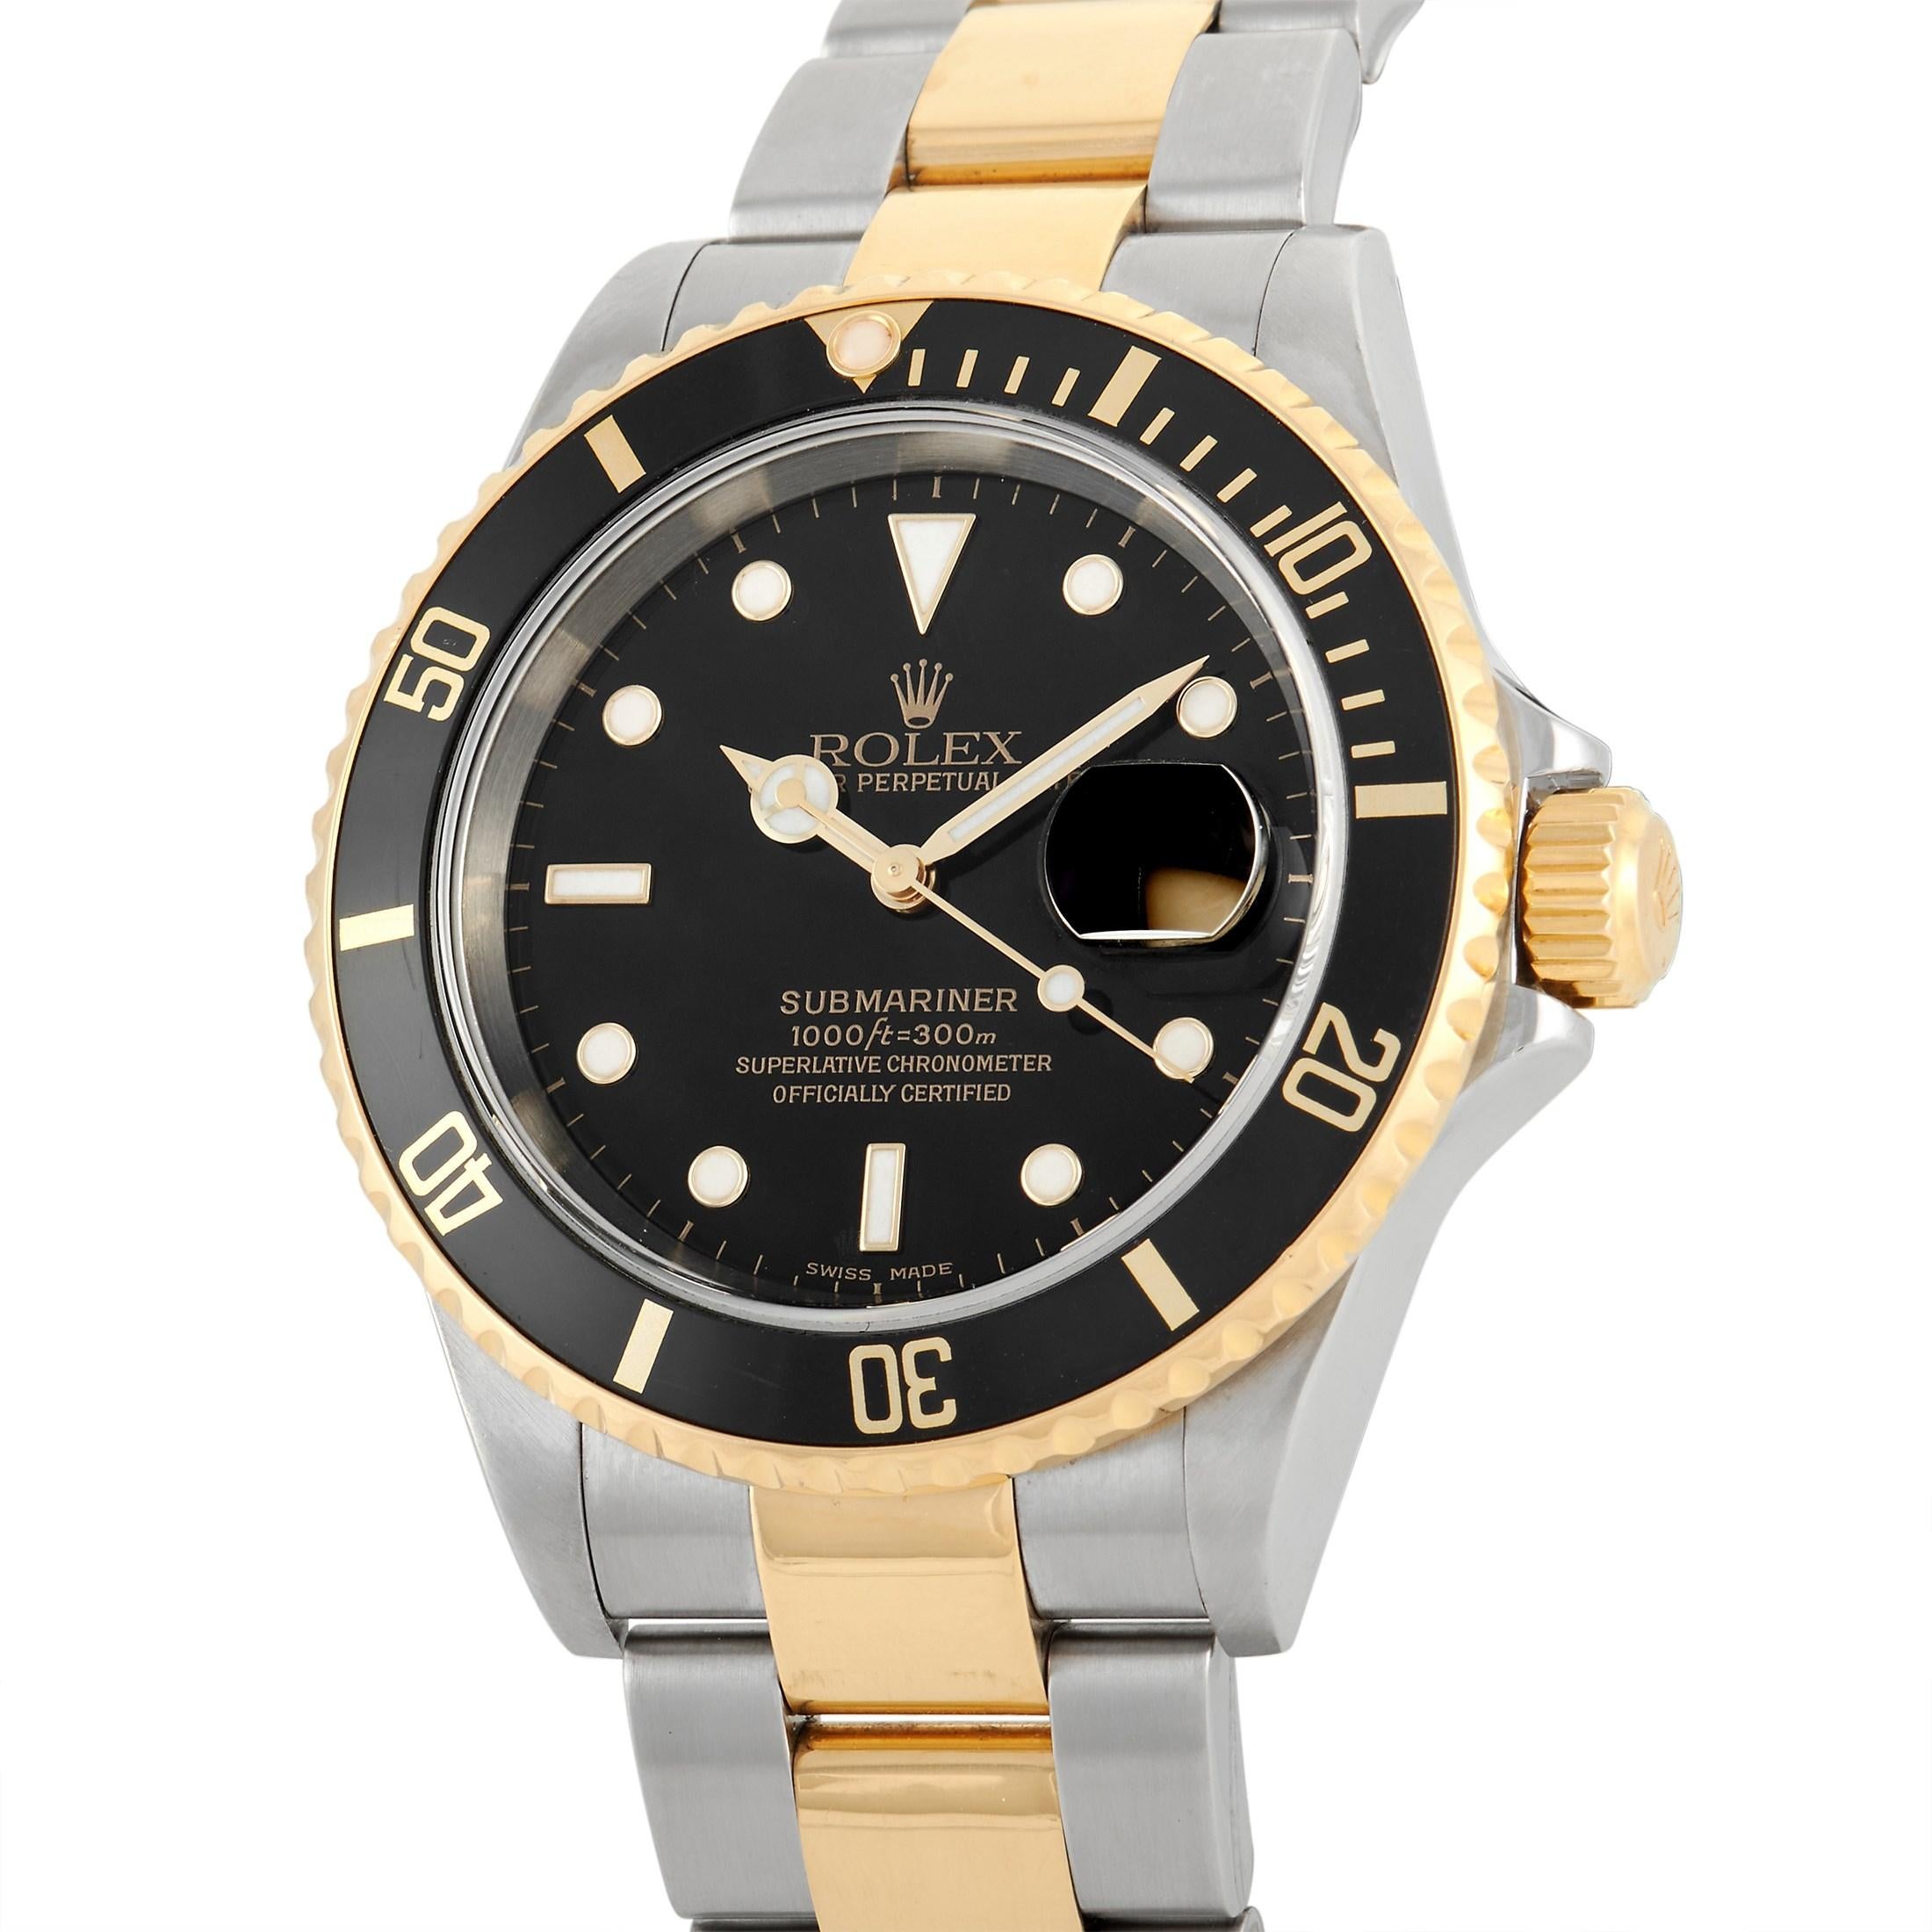 Considered by devotees as the 'last of the best,' this Rolex ref. 16613 features a classic-style design. The case and the outer links of the three-link Oyster bracelet are made from stainless steel. The bezel, crown, and the center links are in 18K